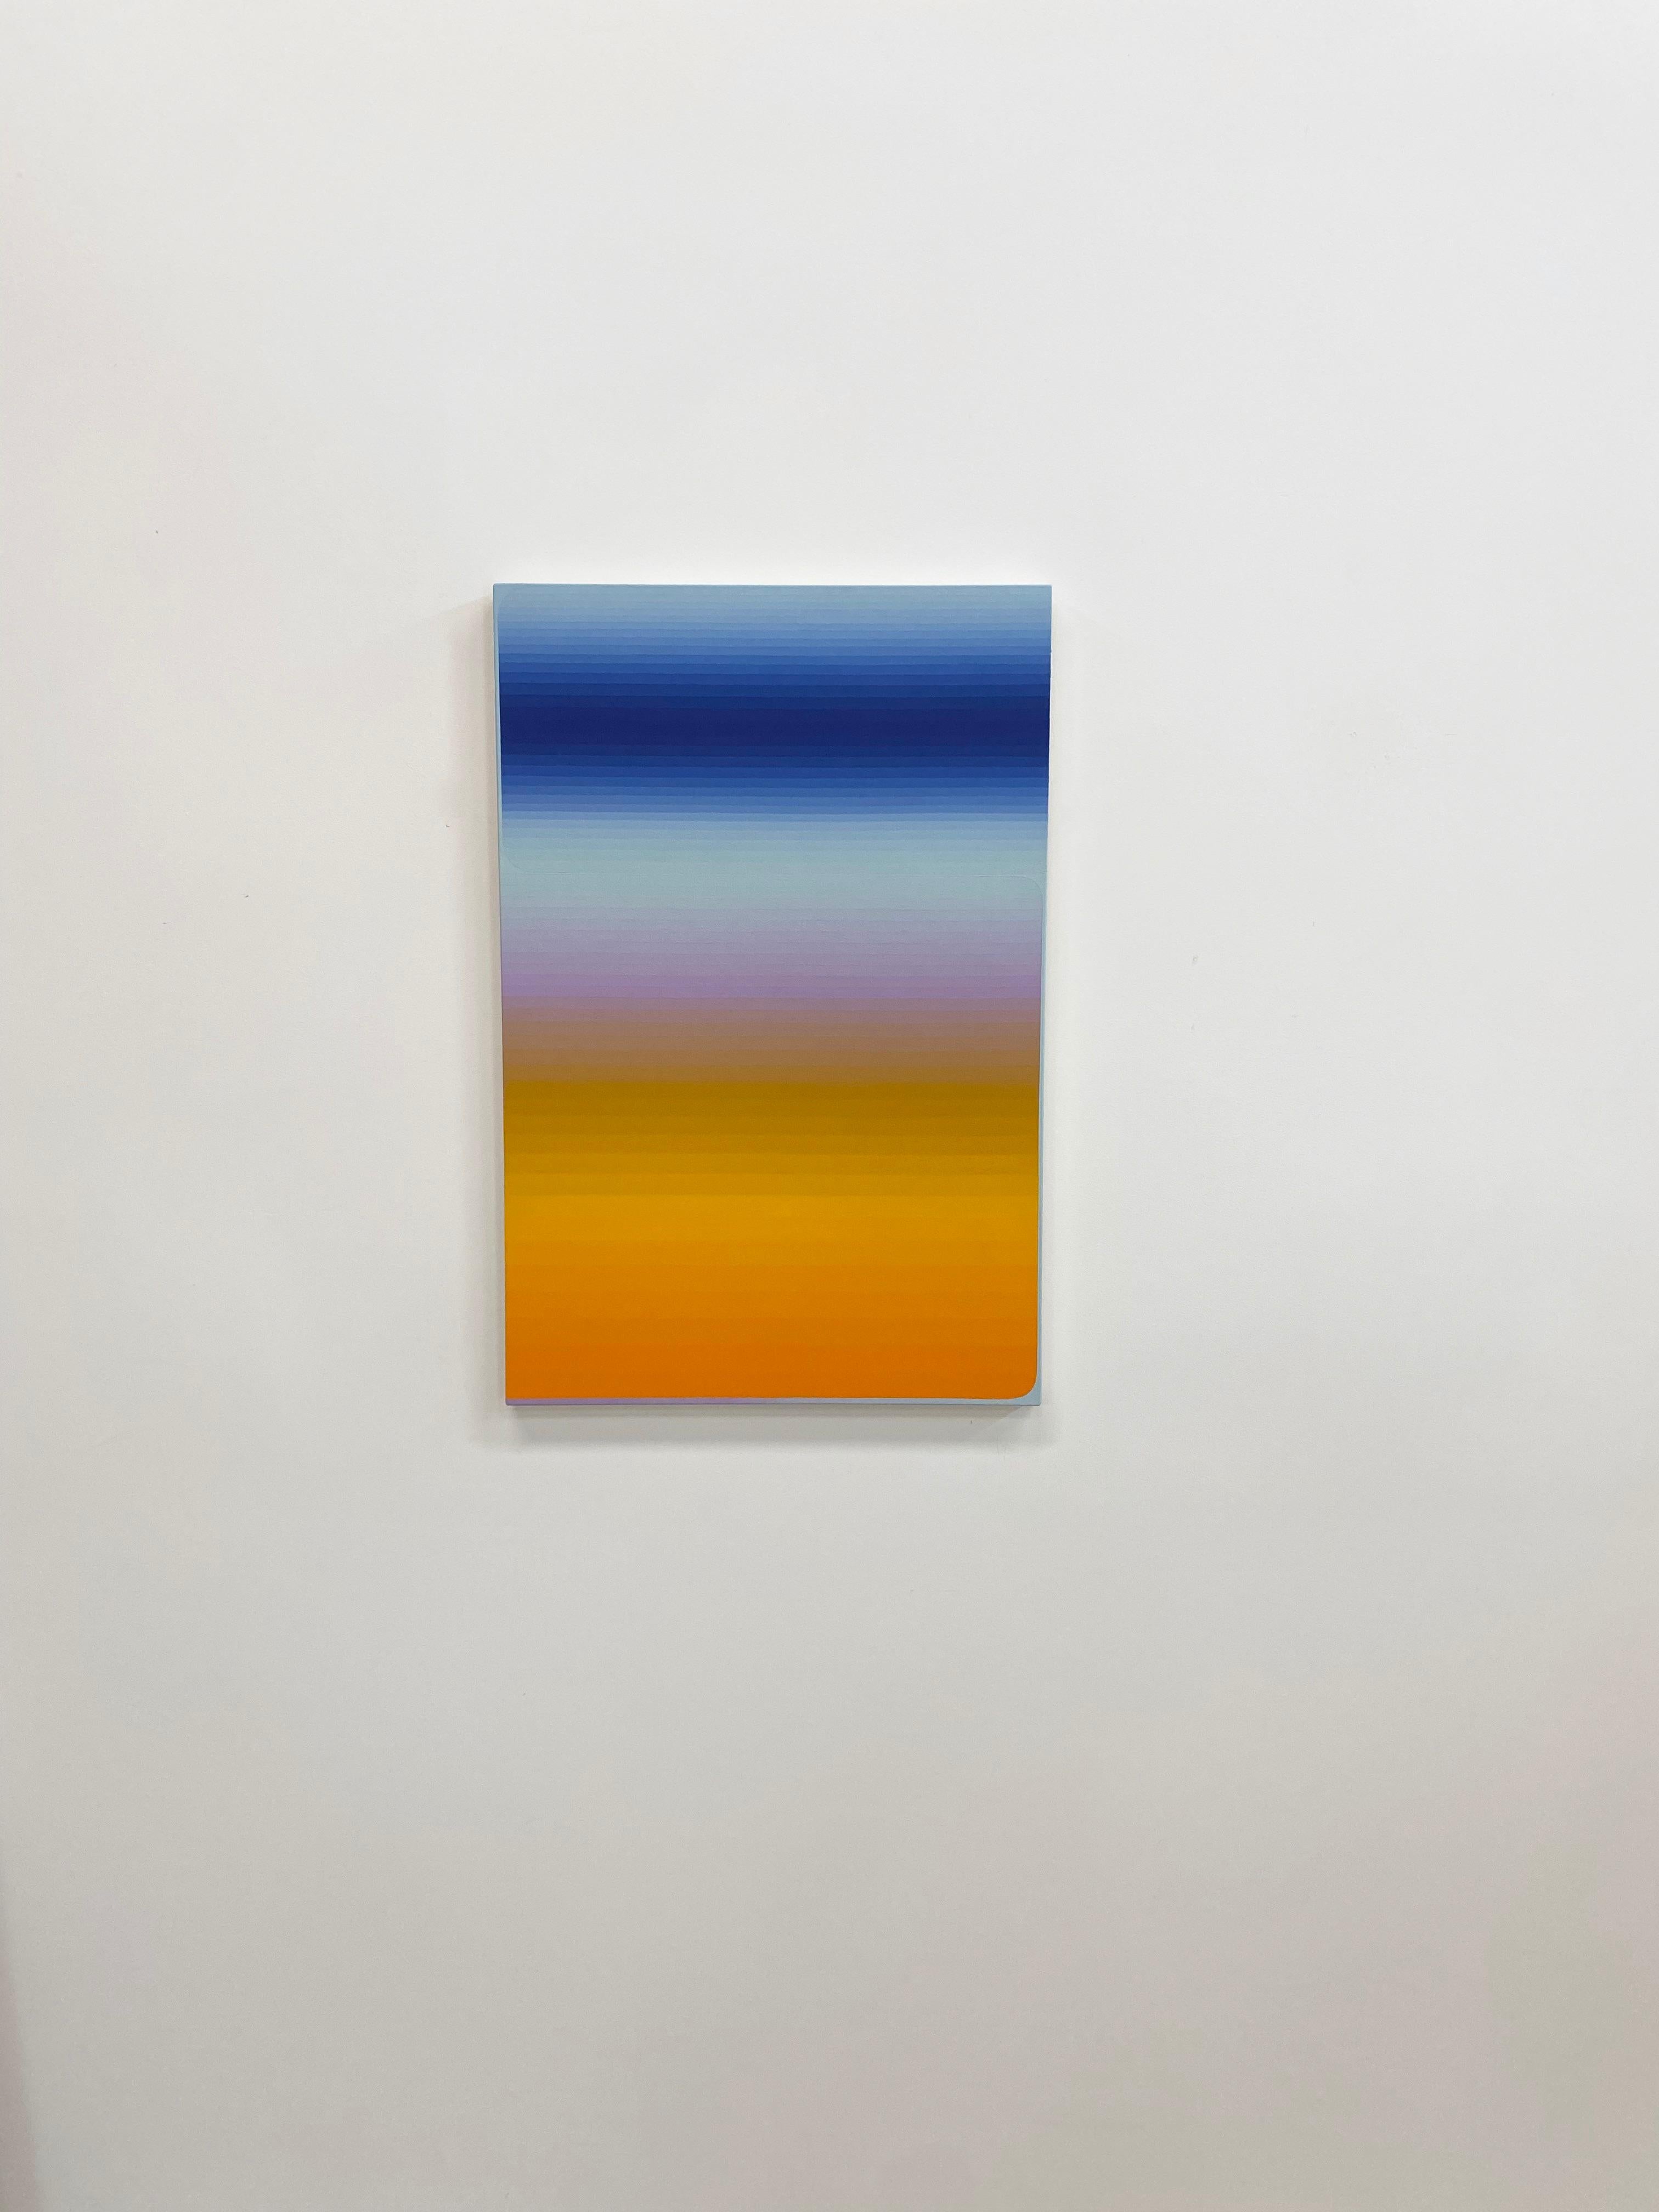 In this vertical abstract painting in acrylic on canvas, thin horizontal stripes of color in gradient shades transition from bright shades of orange at the bottom to pale lilac purplle in the center and pale blue-gray, cobalt and light blue at the